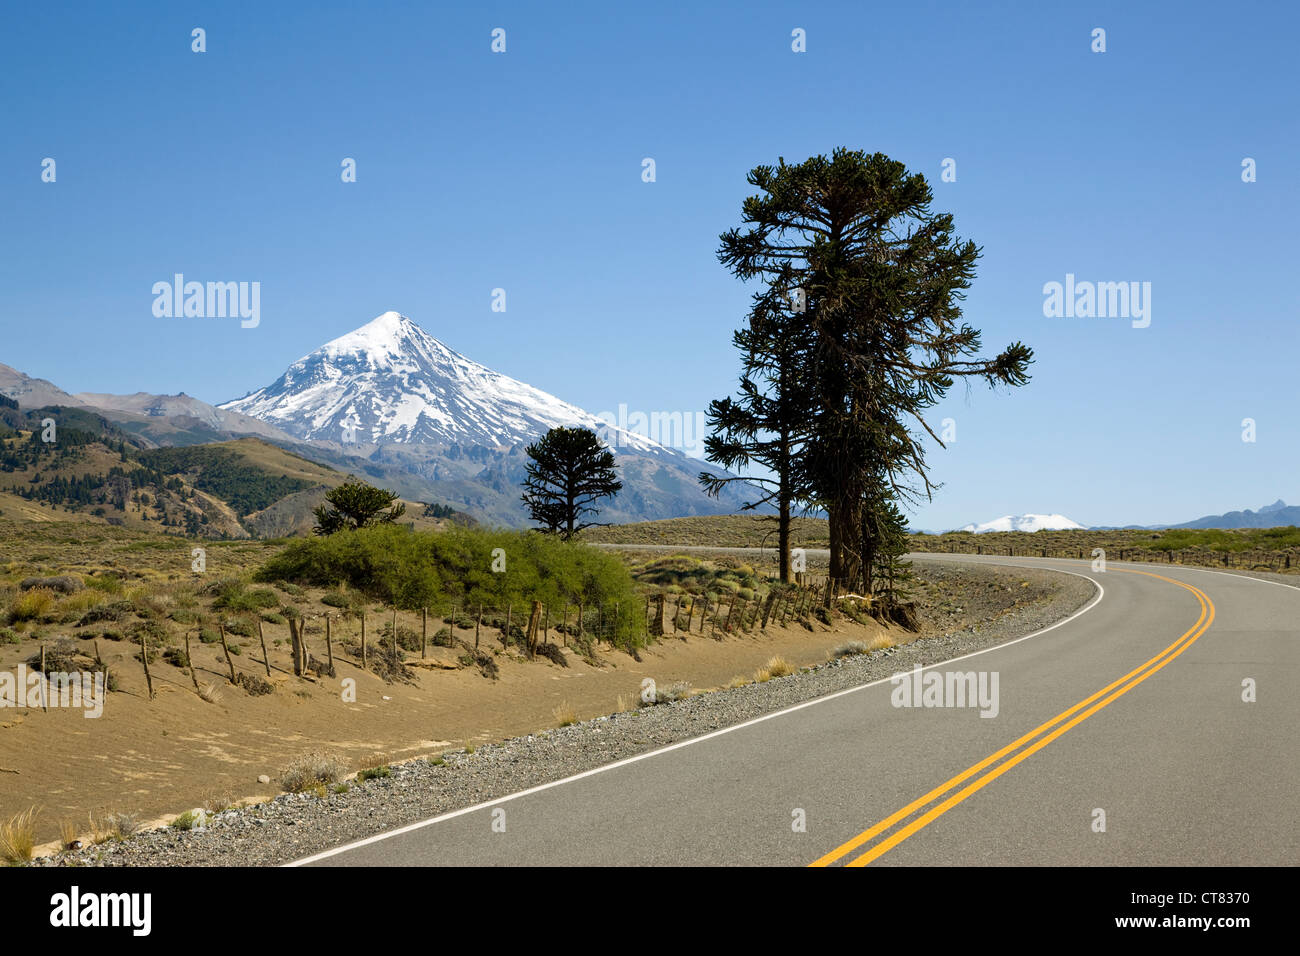 Araucaria or monkey puzzle tree on road Ruta 60 towards Chile with Volcan Lanin in background Stock Photo